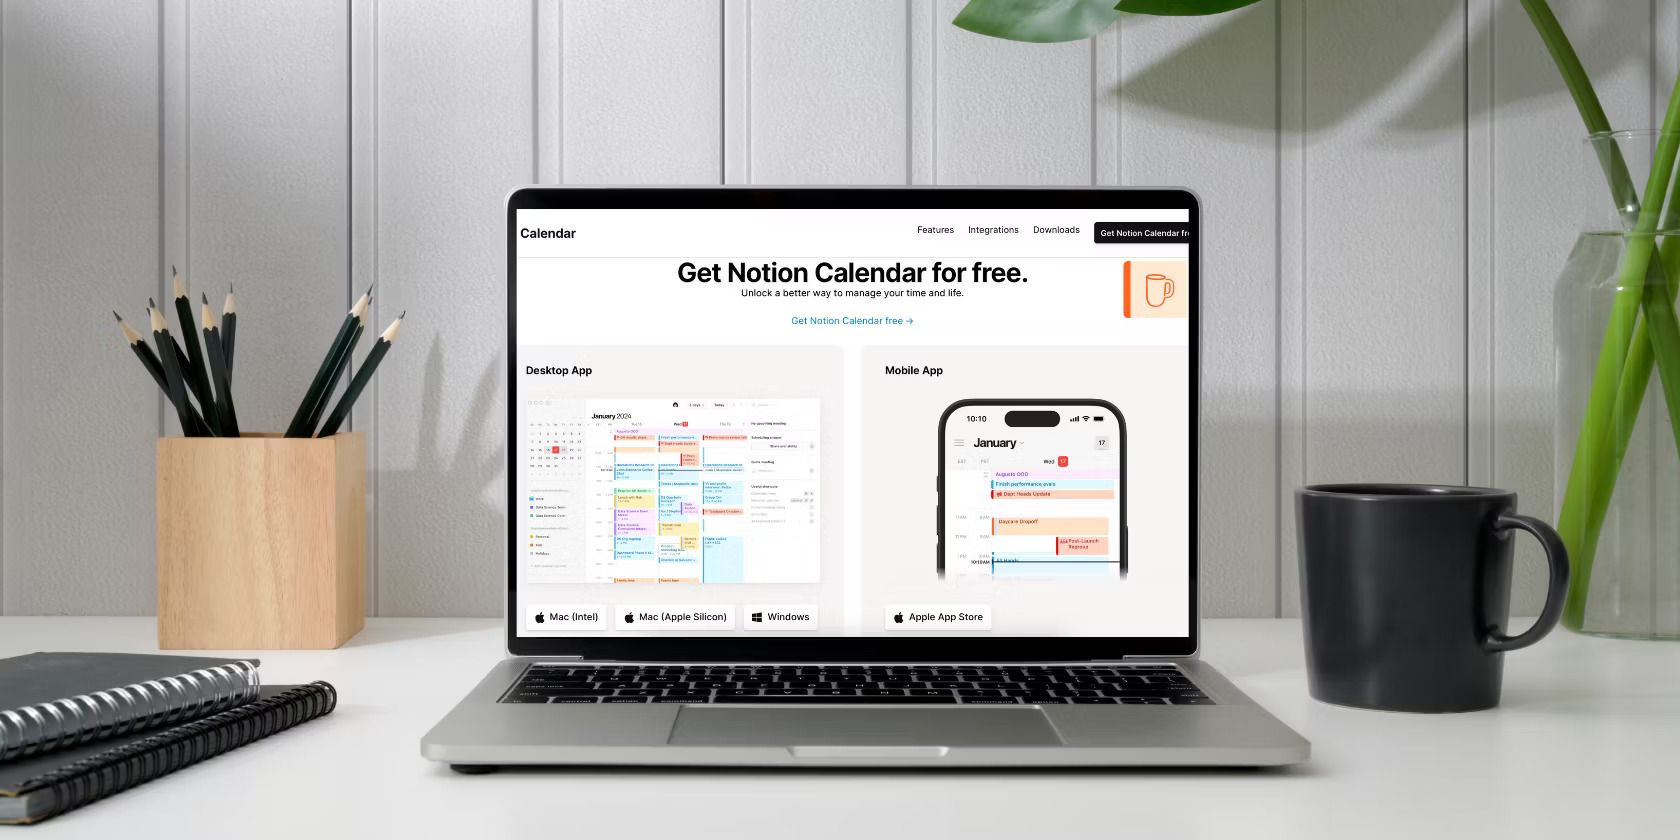 What Is Notion Calendar? How to Use It to Manage Your Time